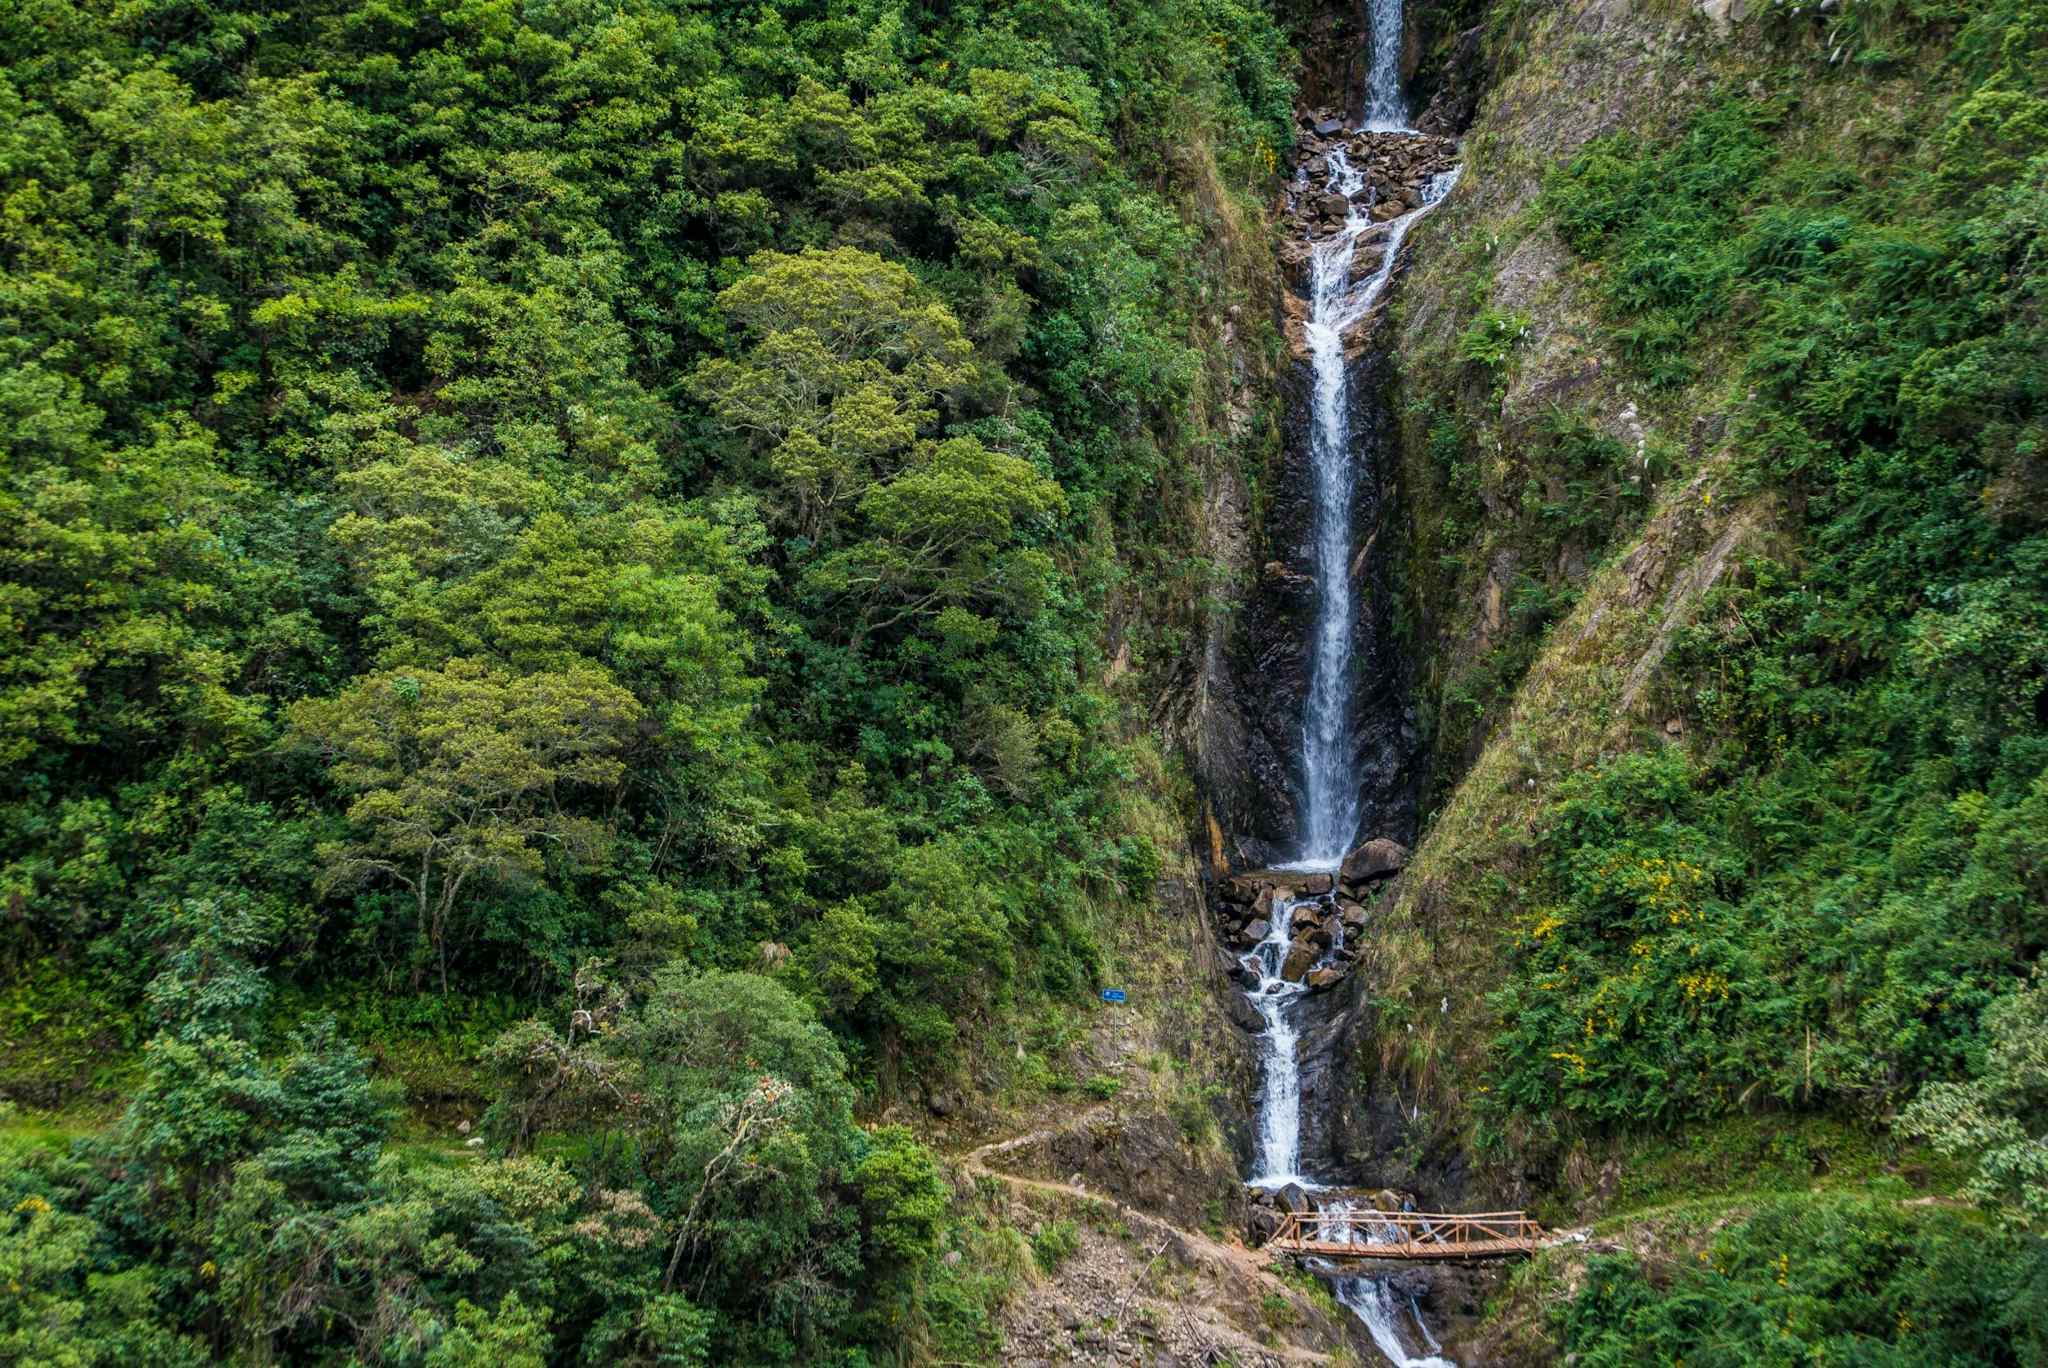 Hikers crossing a wooden bridge below a tall waterfall surrounded by jungle in Peru.